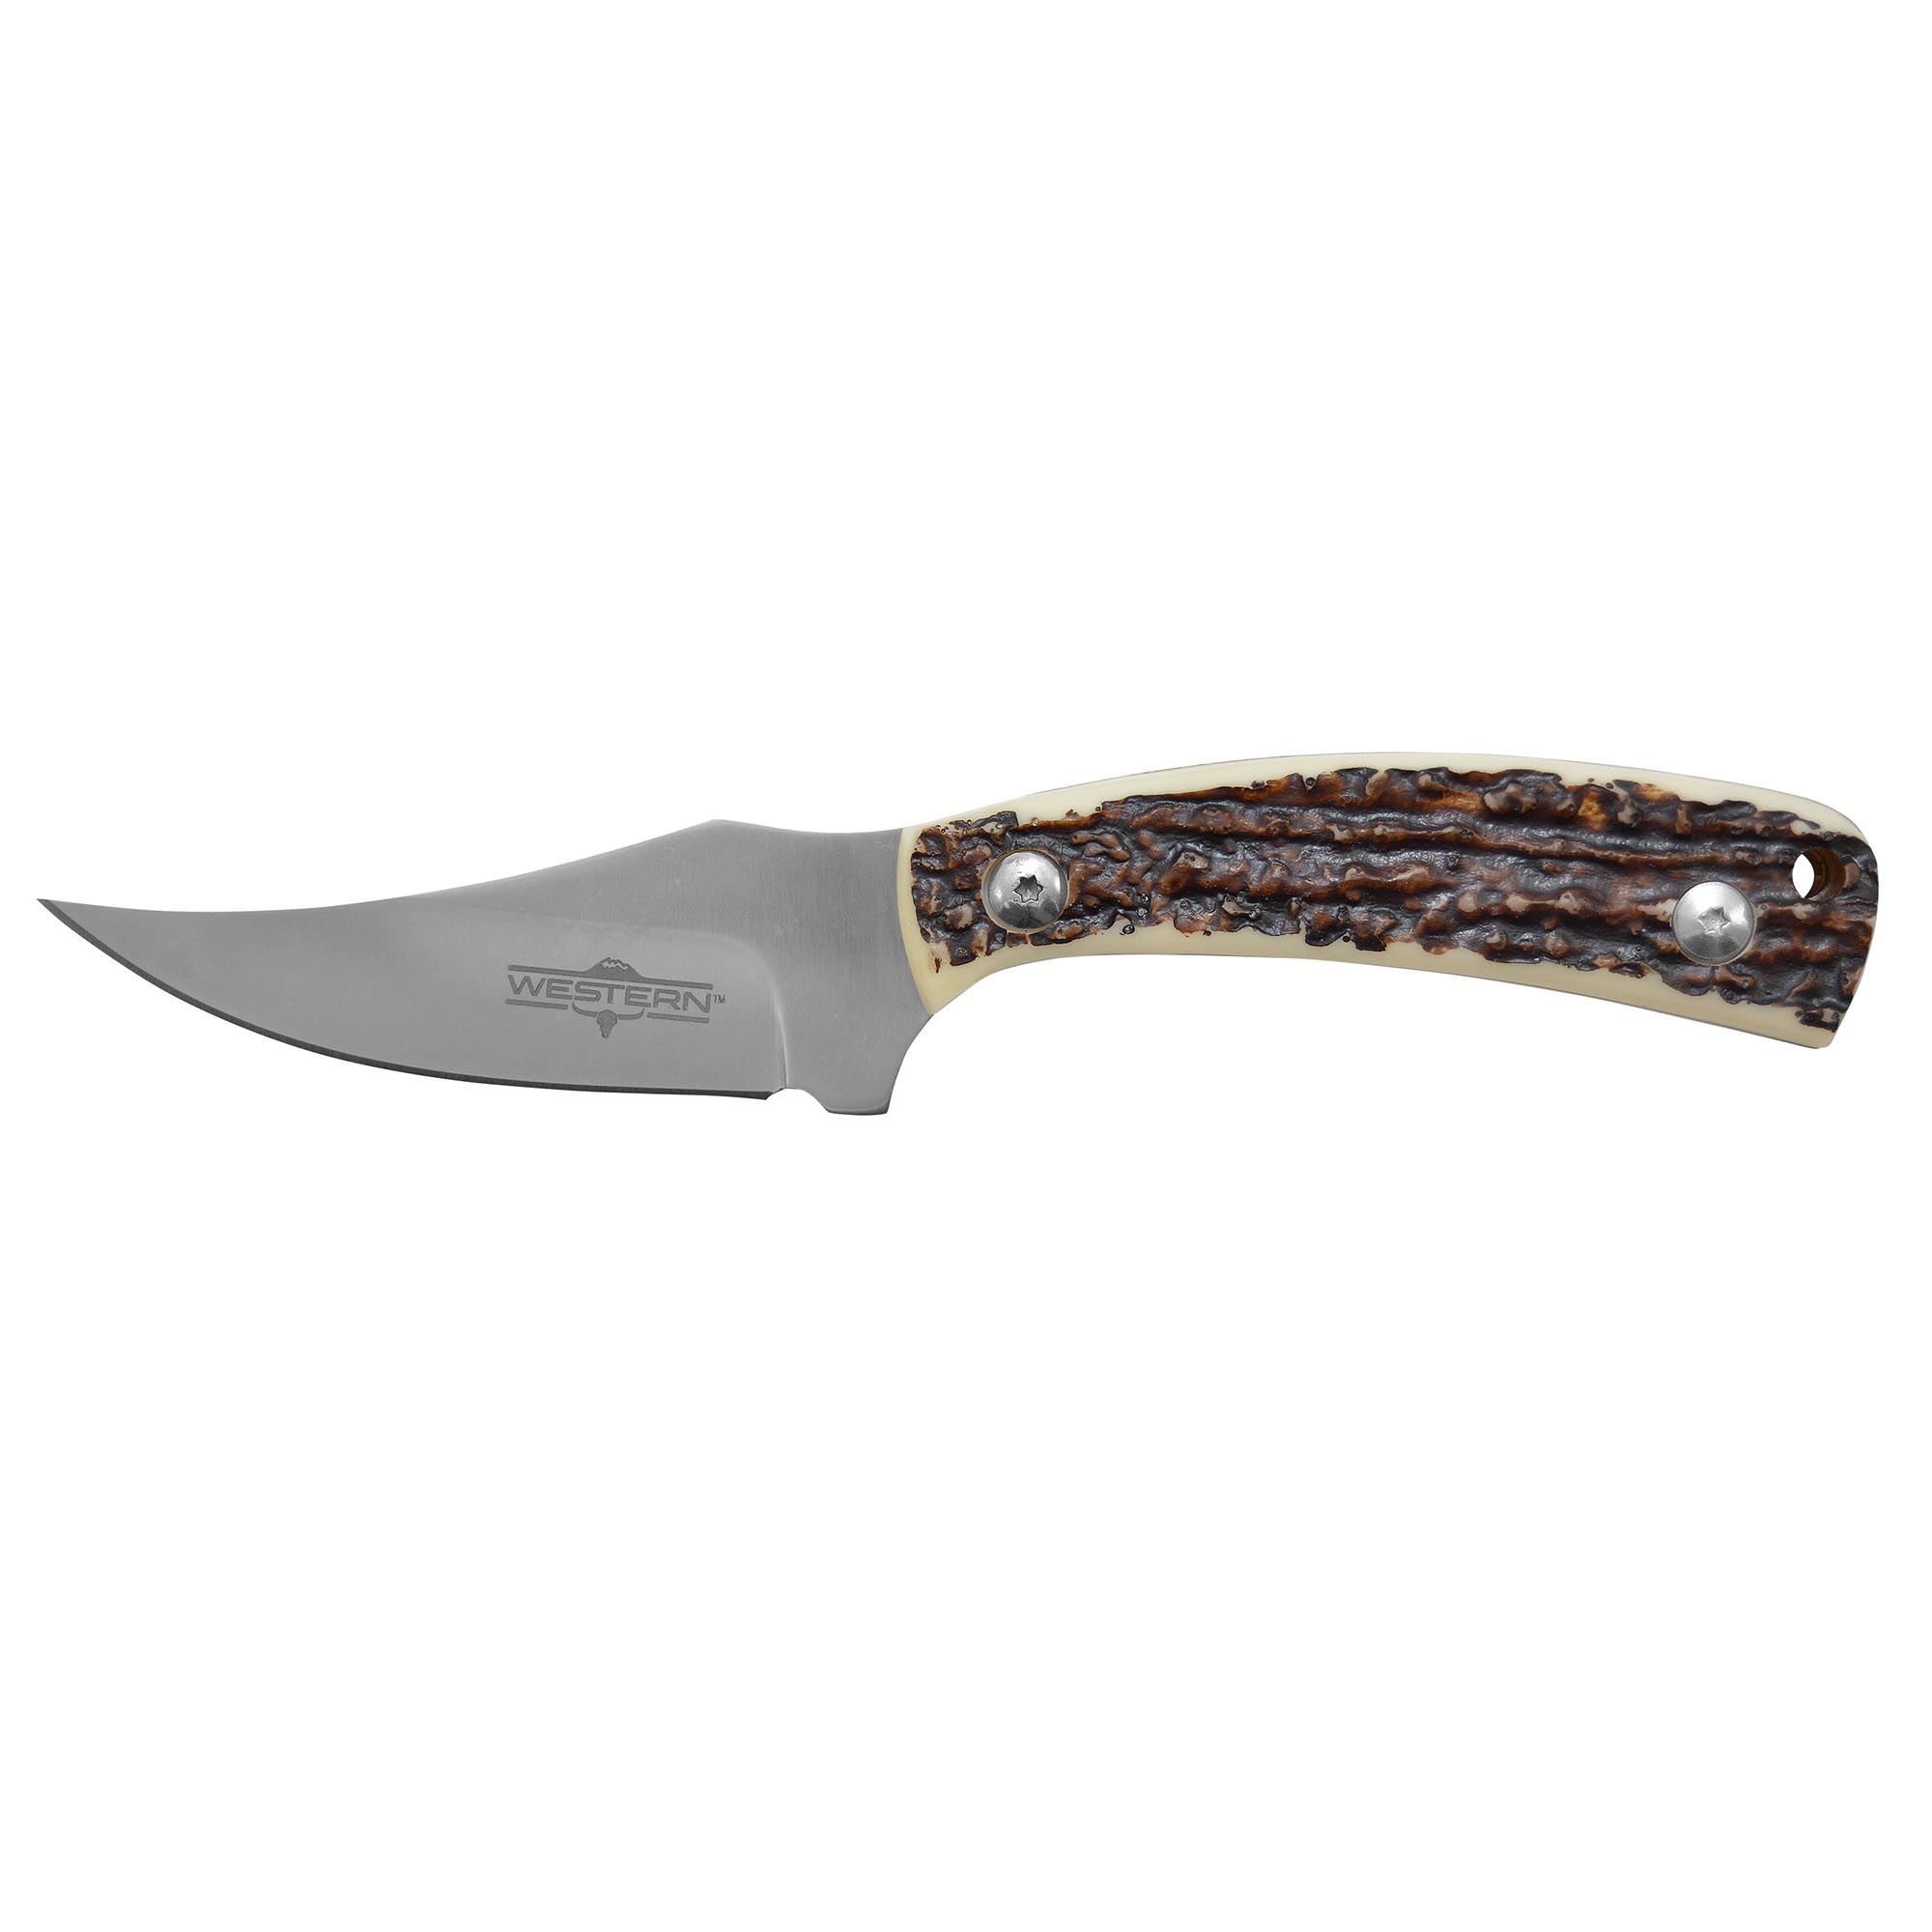 Camillus Knives Western CROSSTRAIL 7 Fixed Blade Knife 19161